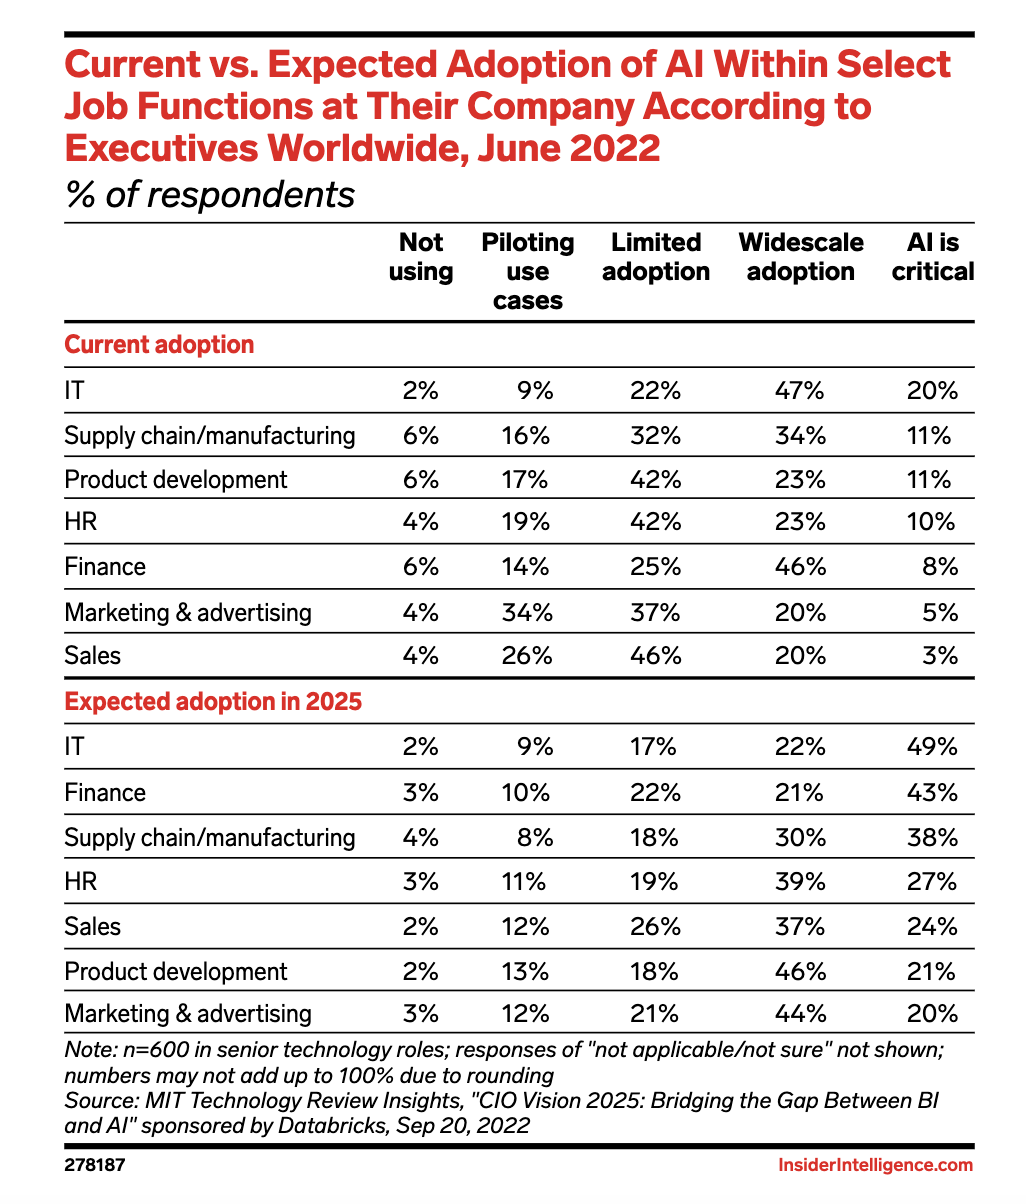 Insider Intelligence data showing the current vs. expected adoption of AI within select job functions at their company according to executives worldwide, June 2022